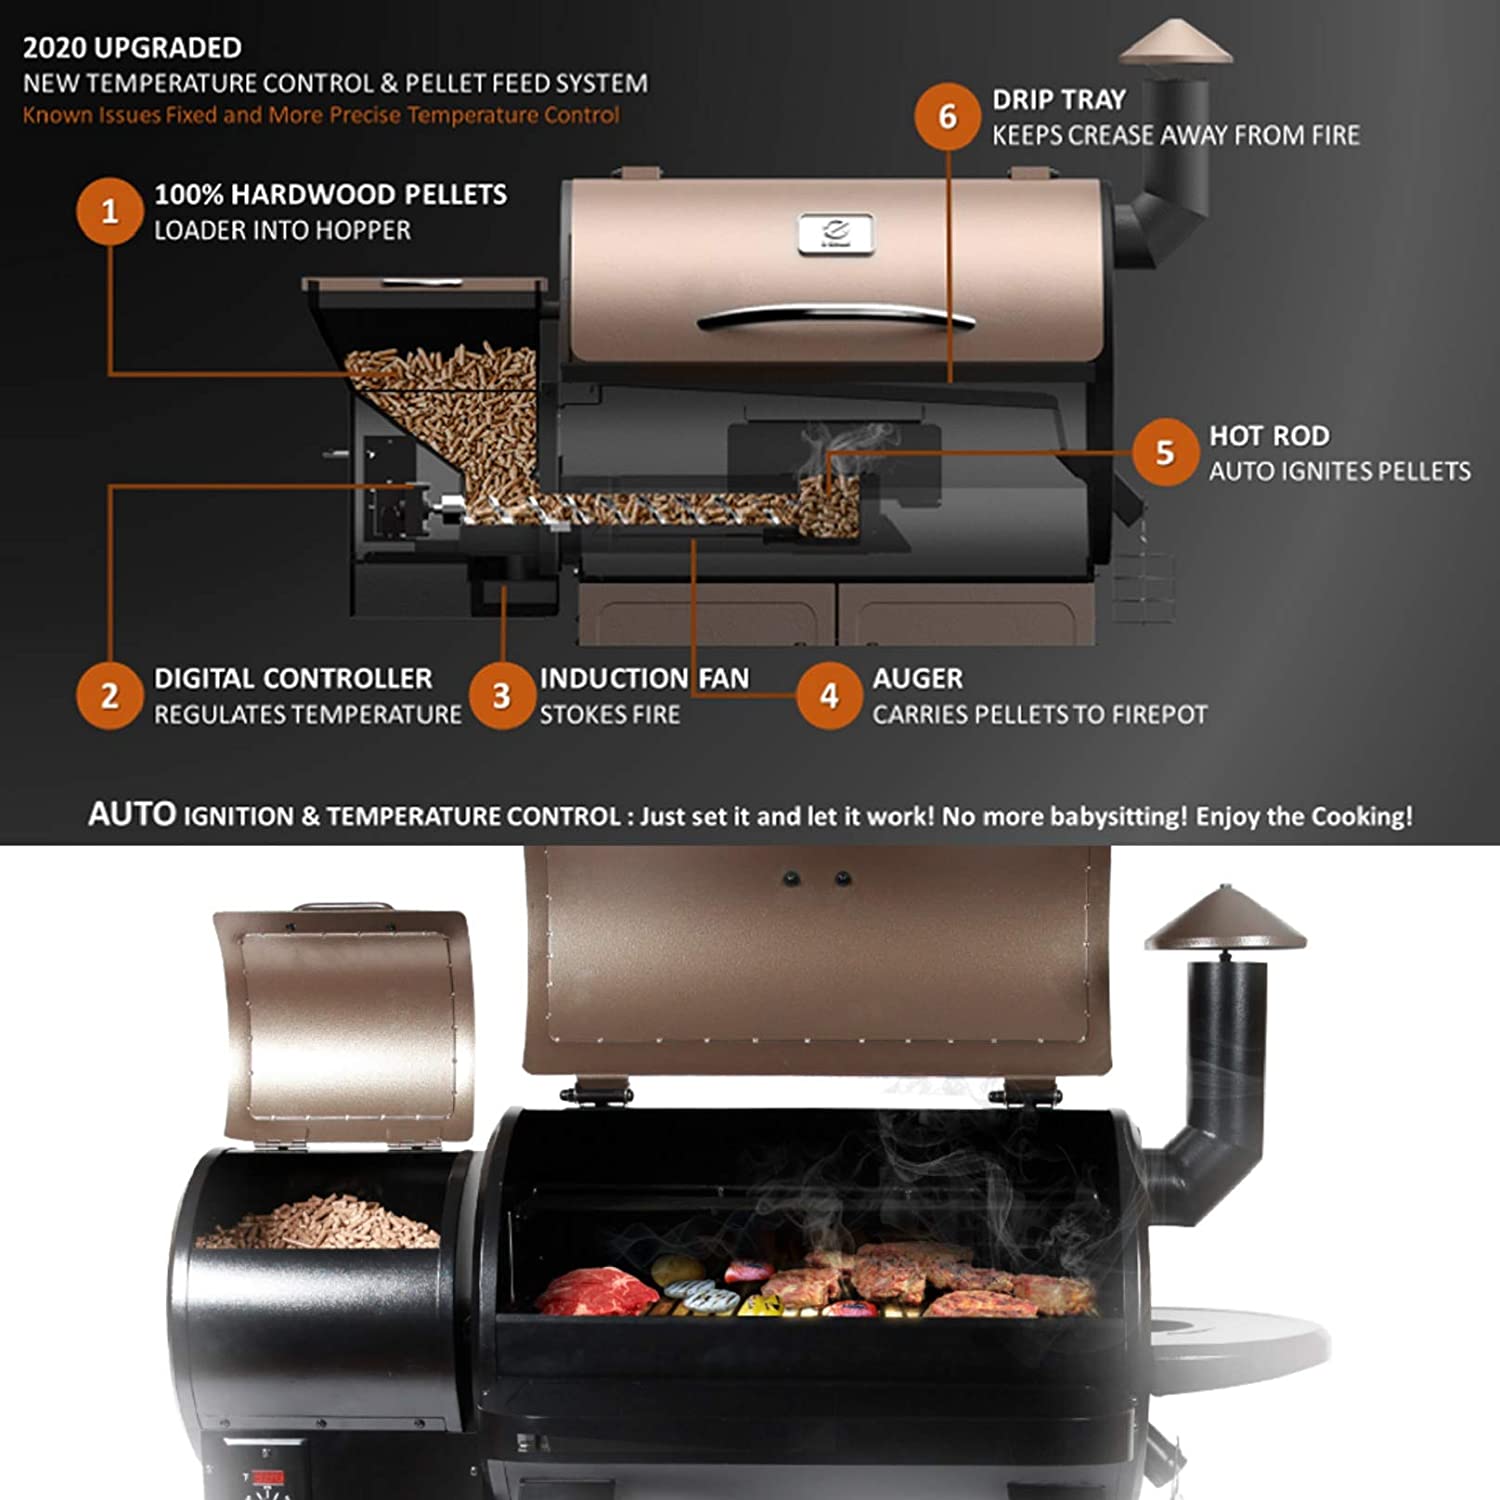 Z GRILLS ZPG-450A 2020 Upgrade Wood Pellet Grill & Smoker 6 in 1 BBQ Grill Auto Temperature Control, 450 sq in, Bronze - image 2 of 7